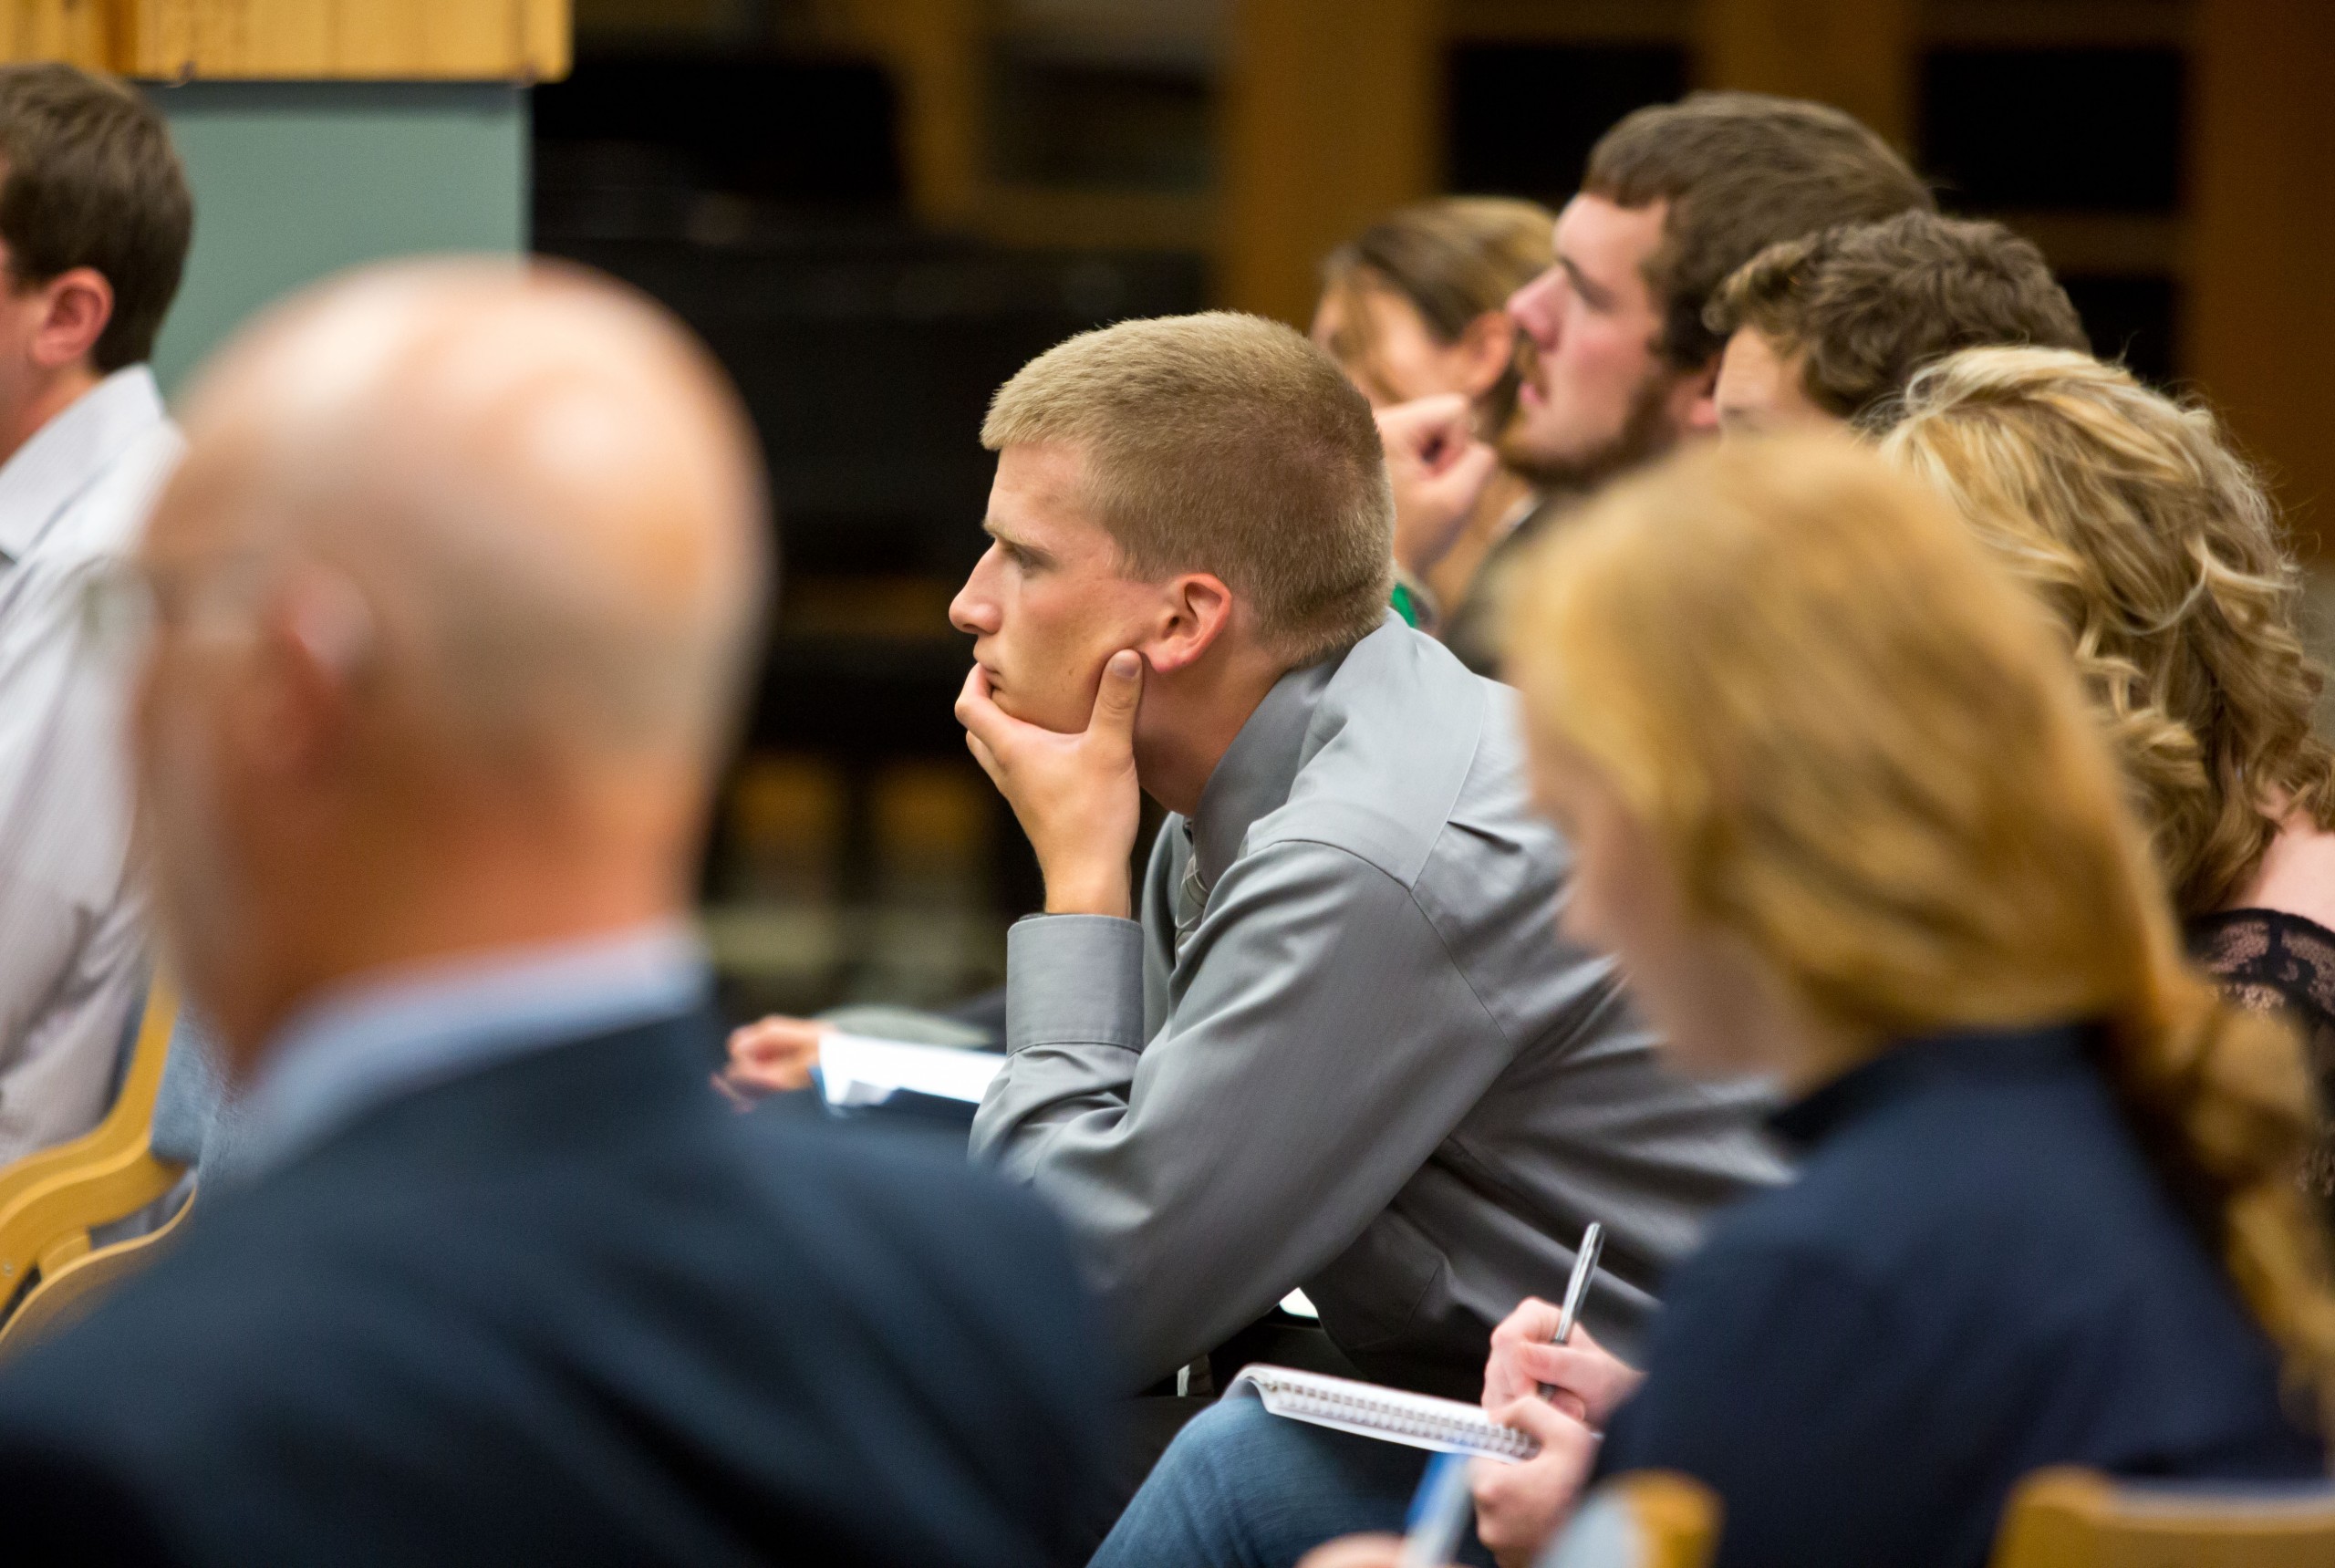 Lutheran Studies Conference at PLU on Thursday, Sept. 25, 2014. (Photo/John Froschauer)